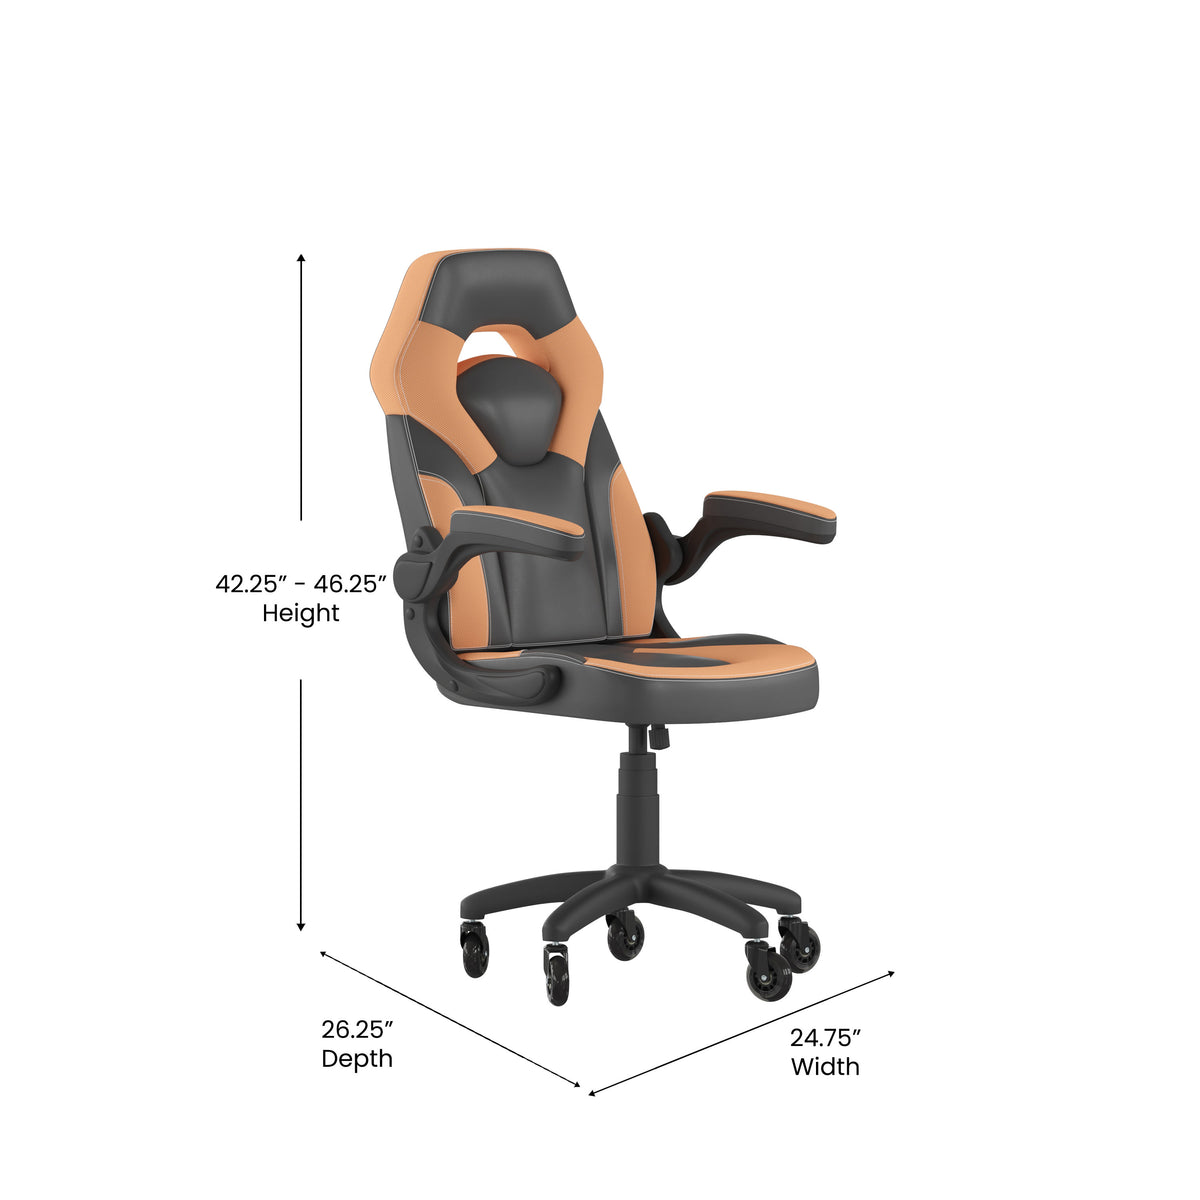 Orange |#| Office Gaming Chair with Skater Wheels & Flip Up Arms - Orange LeatherSoft